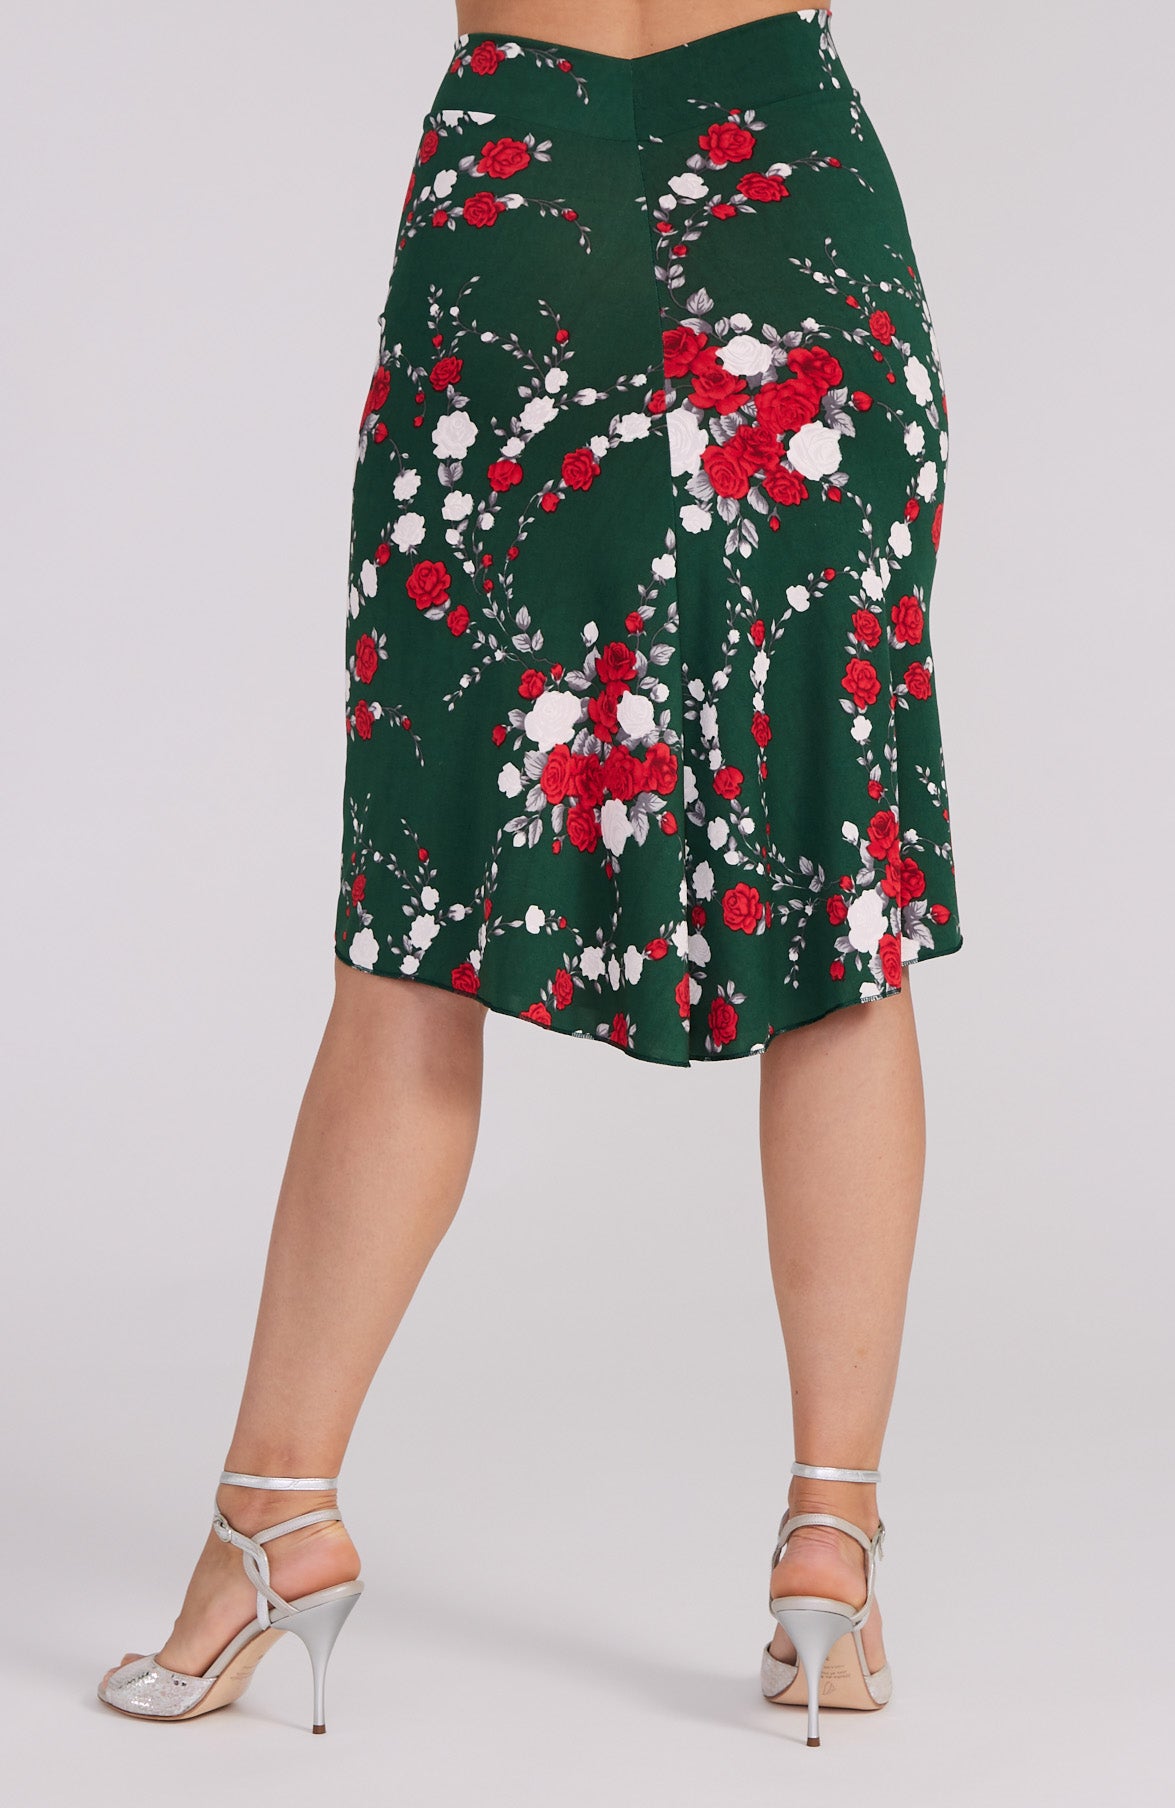 argentine tango skirt in red rose print on green